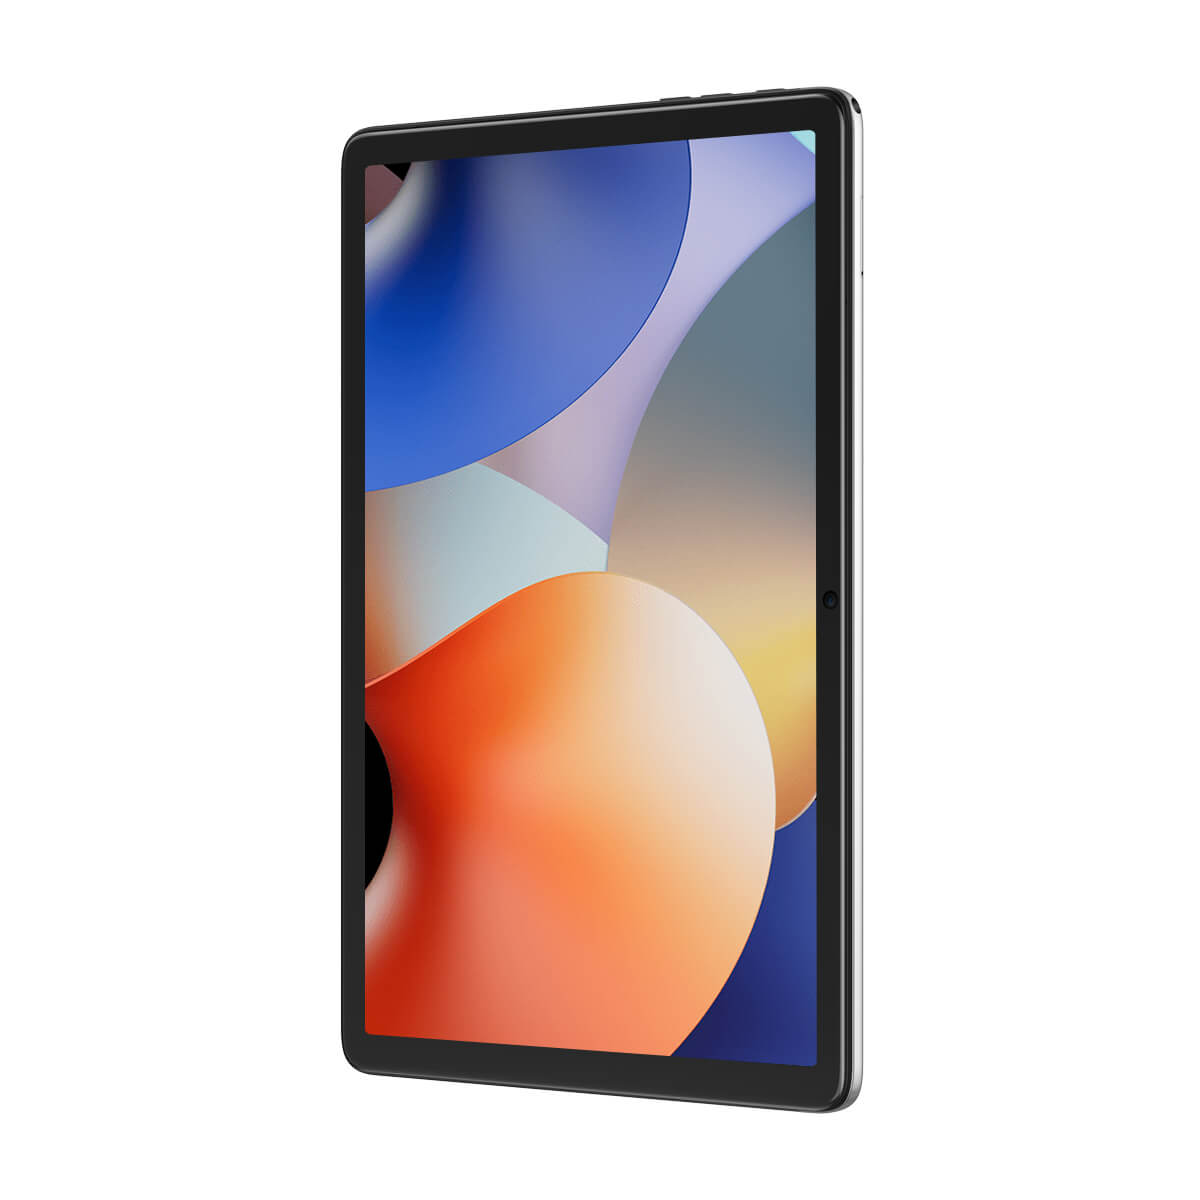 OSCAL Pad 10 8+128GB 6580mAh タブレット – Blackview Official Store